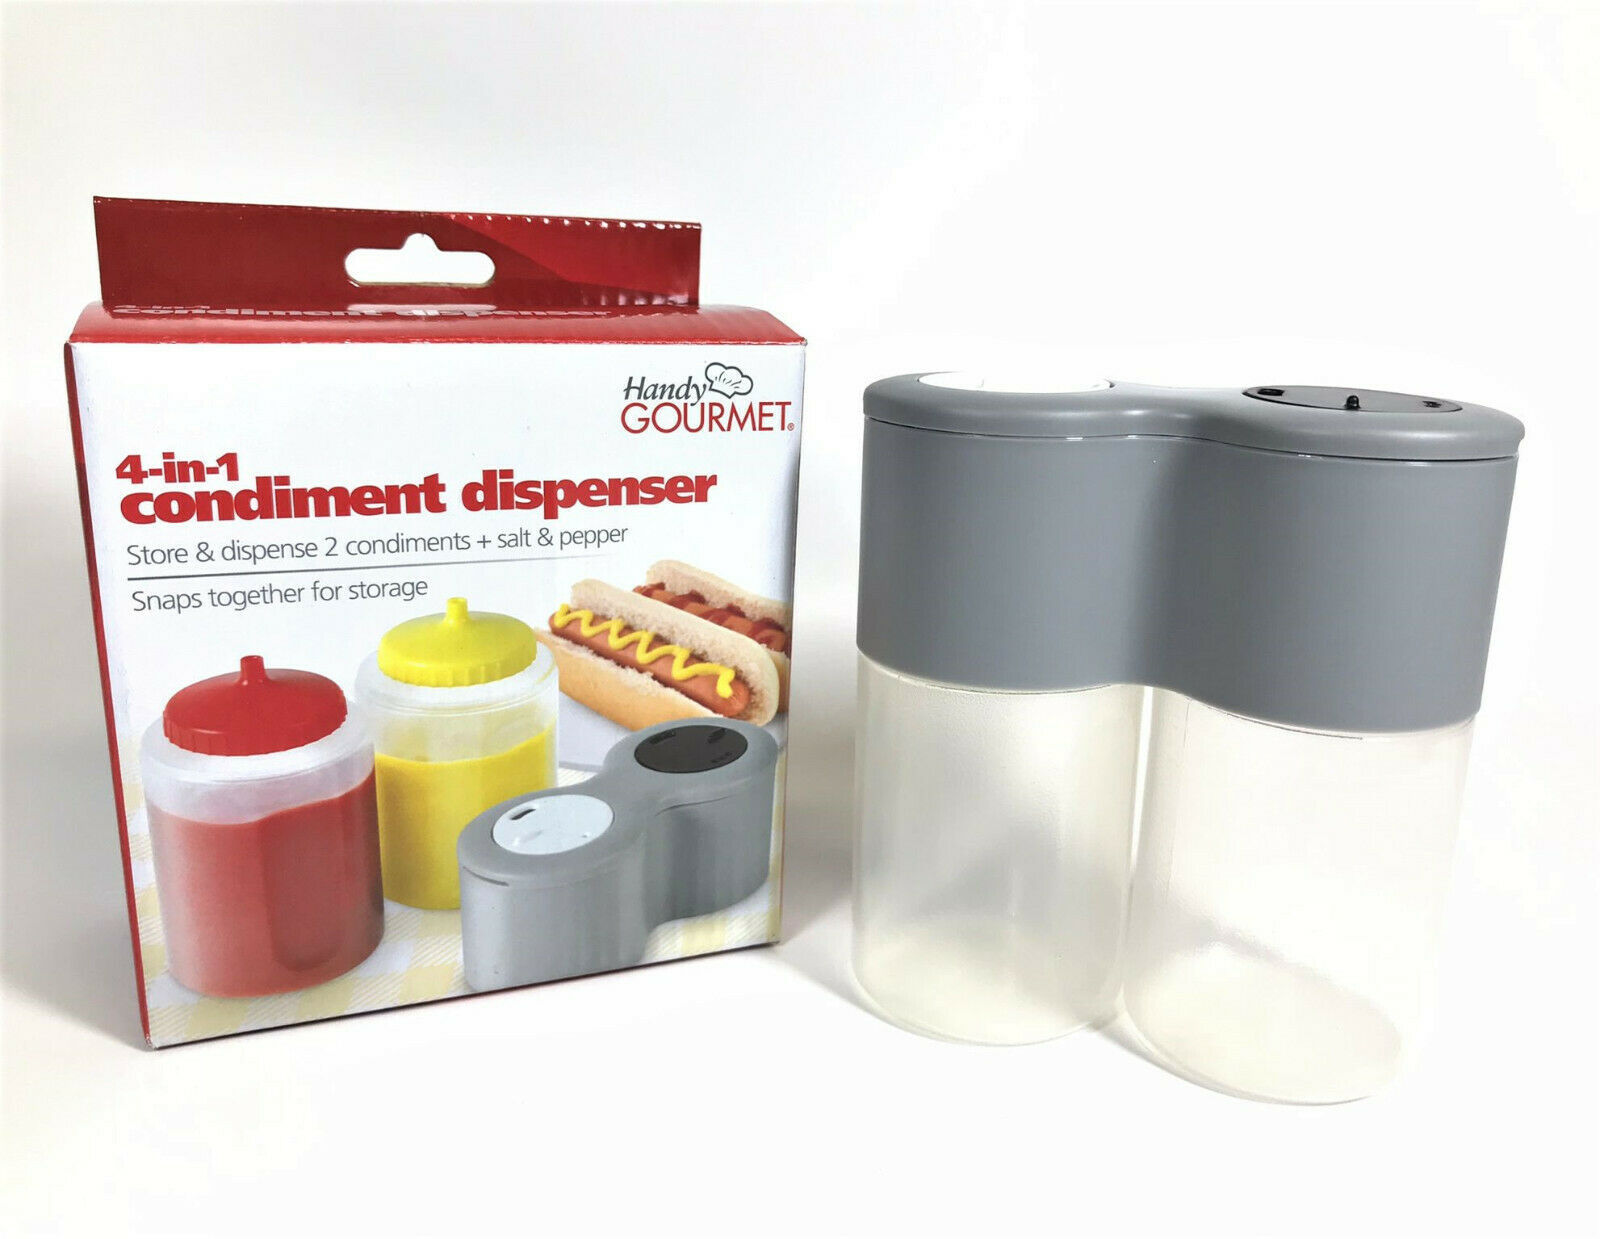 Handy Gourmet Store and Dispense 4 in 1 Condiment Dispenser